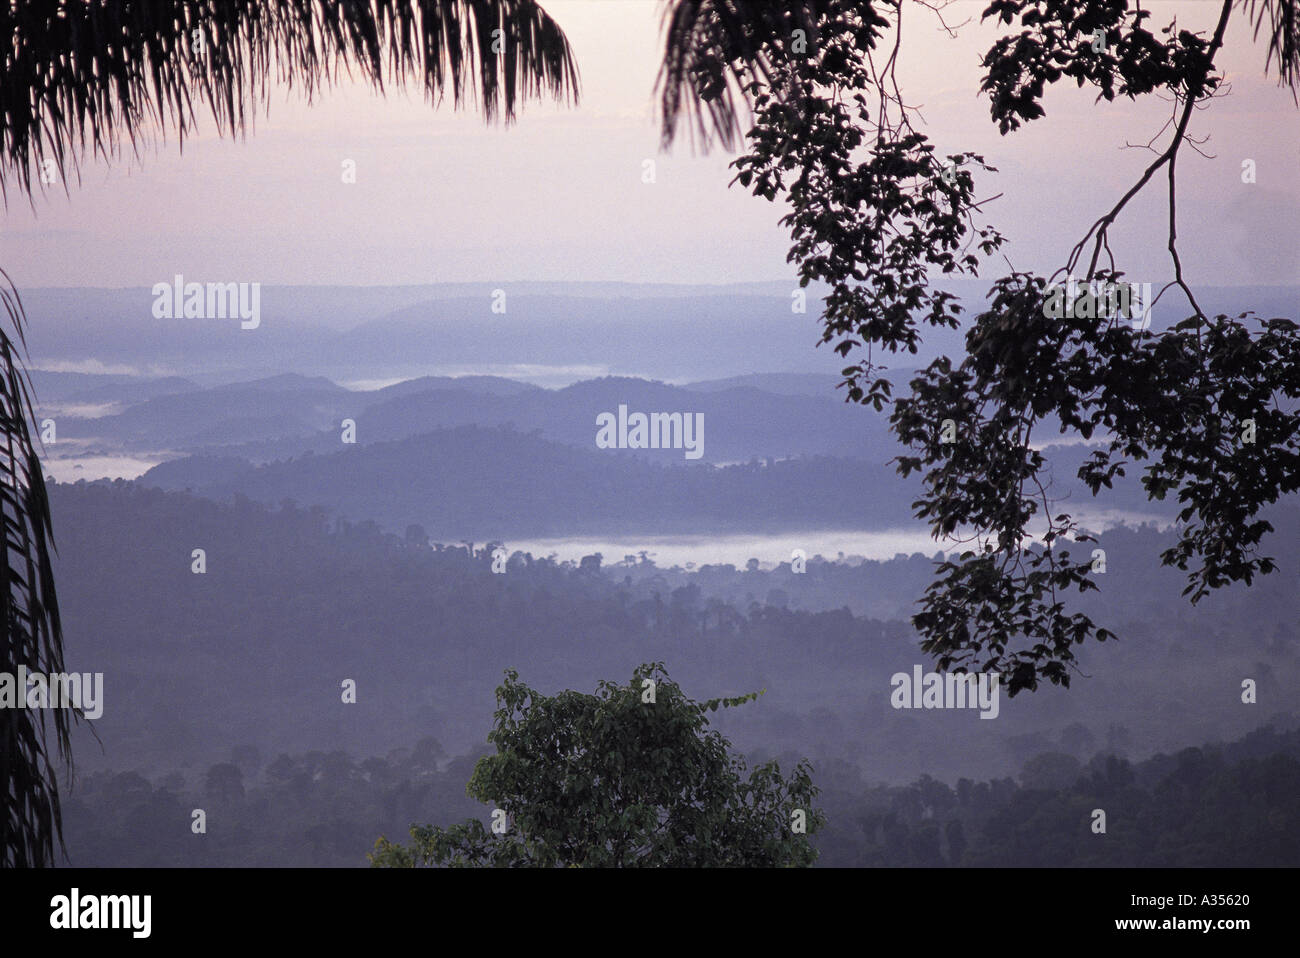 Para State Brazil Stunning earle morning view over misty rainforest at dawn Amazon Stock Photo